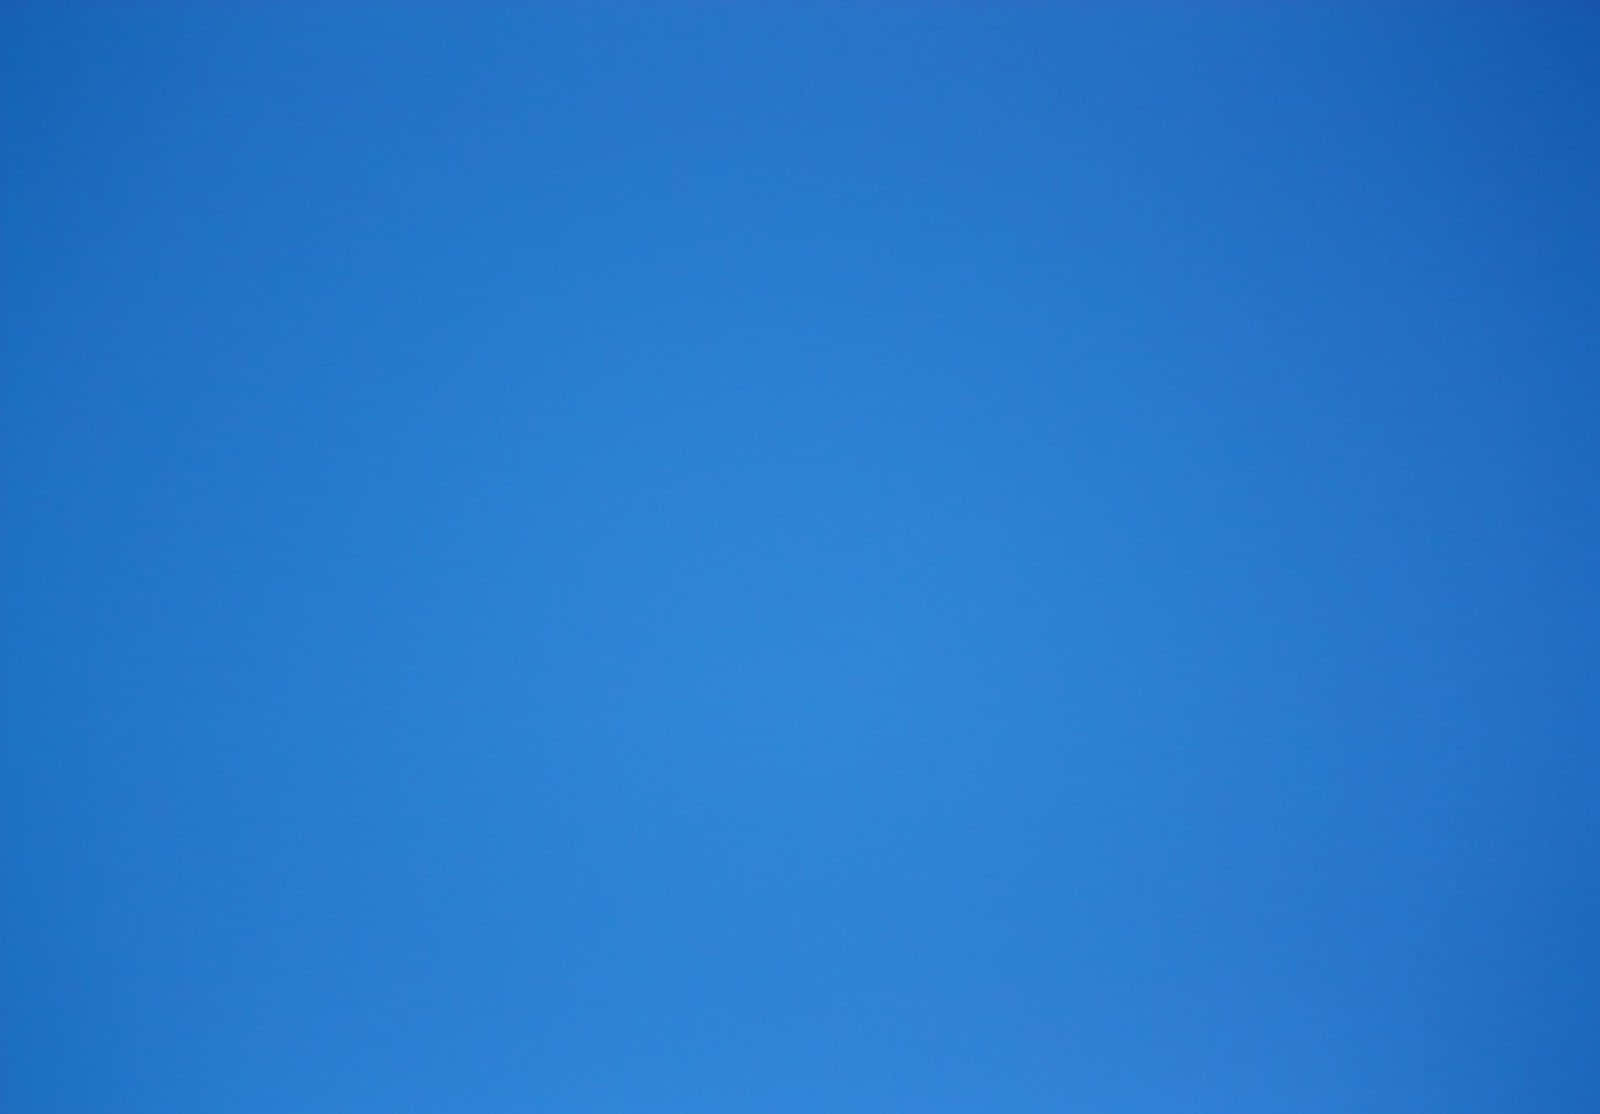 A Blue Sky With A Kite Flying In It